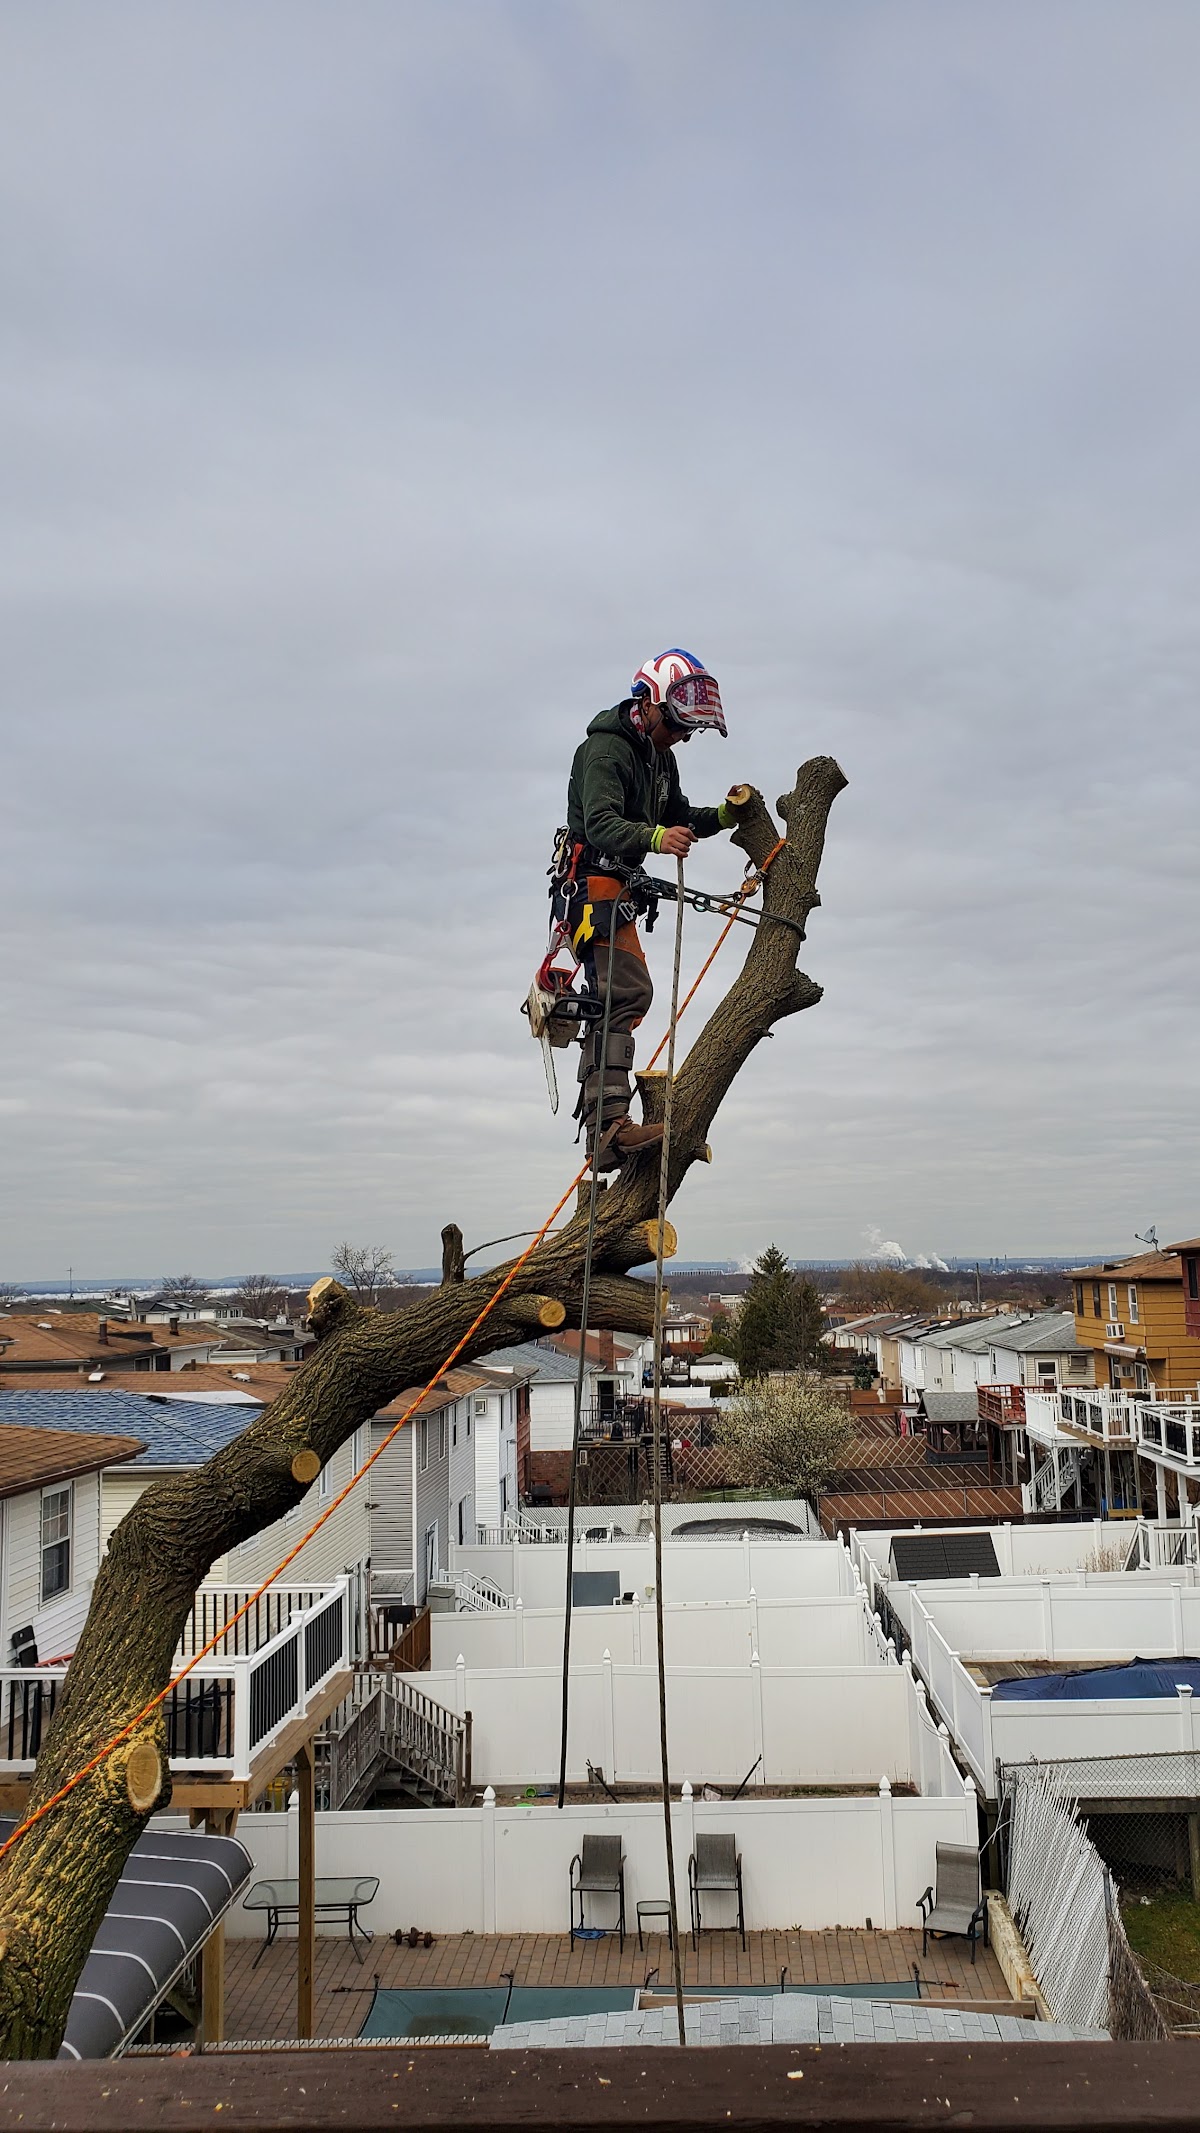 “I can’t say enough good things about the exceptional service provided by Kyles Tree Service Company]